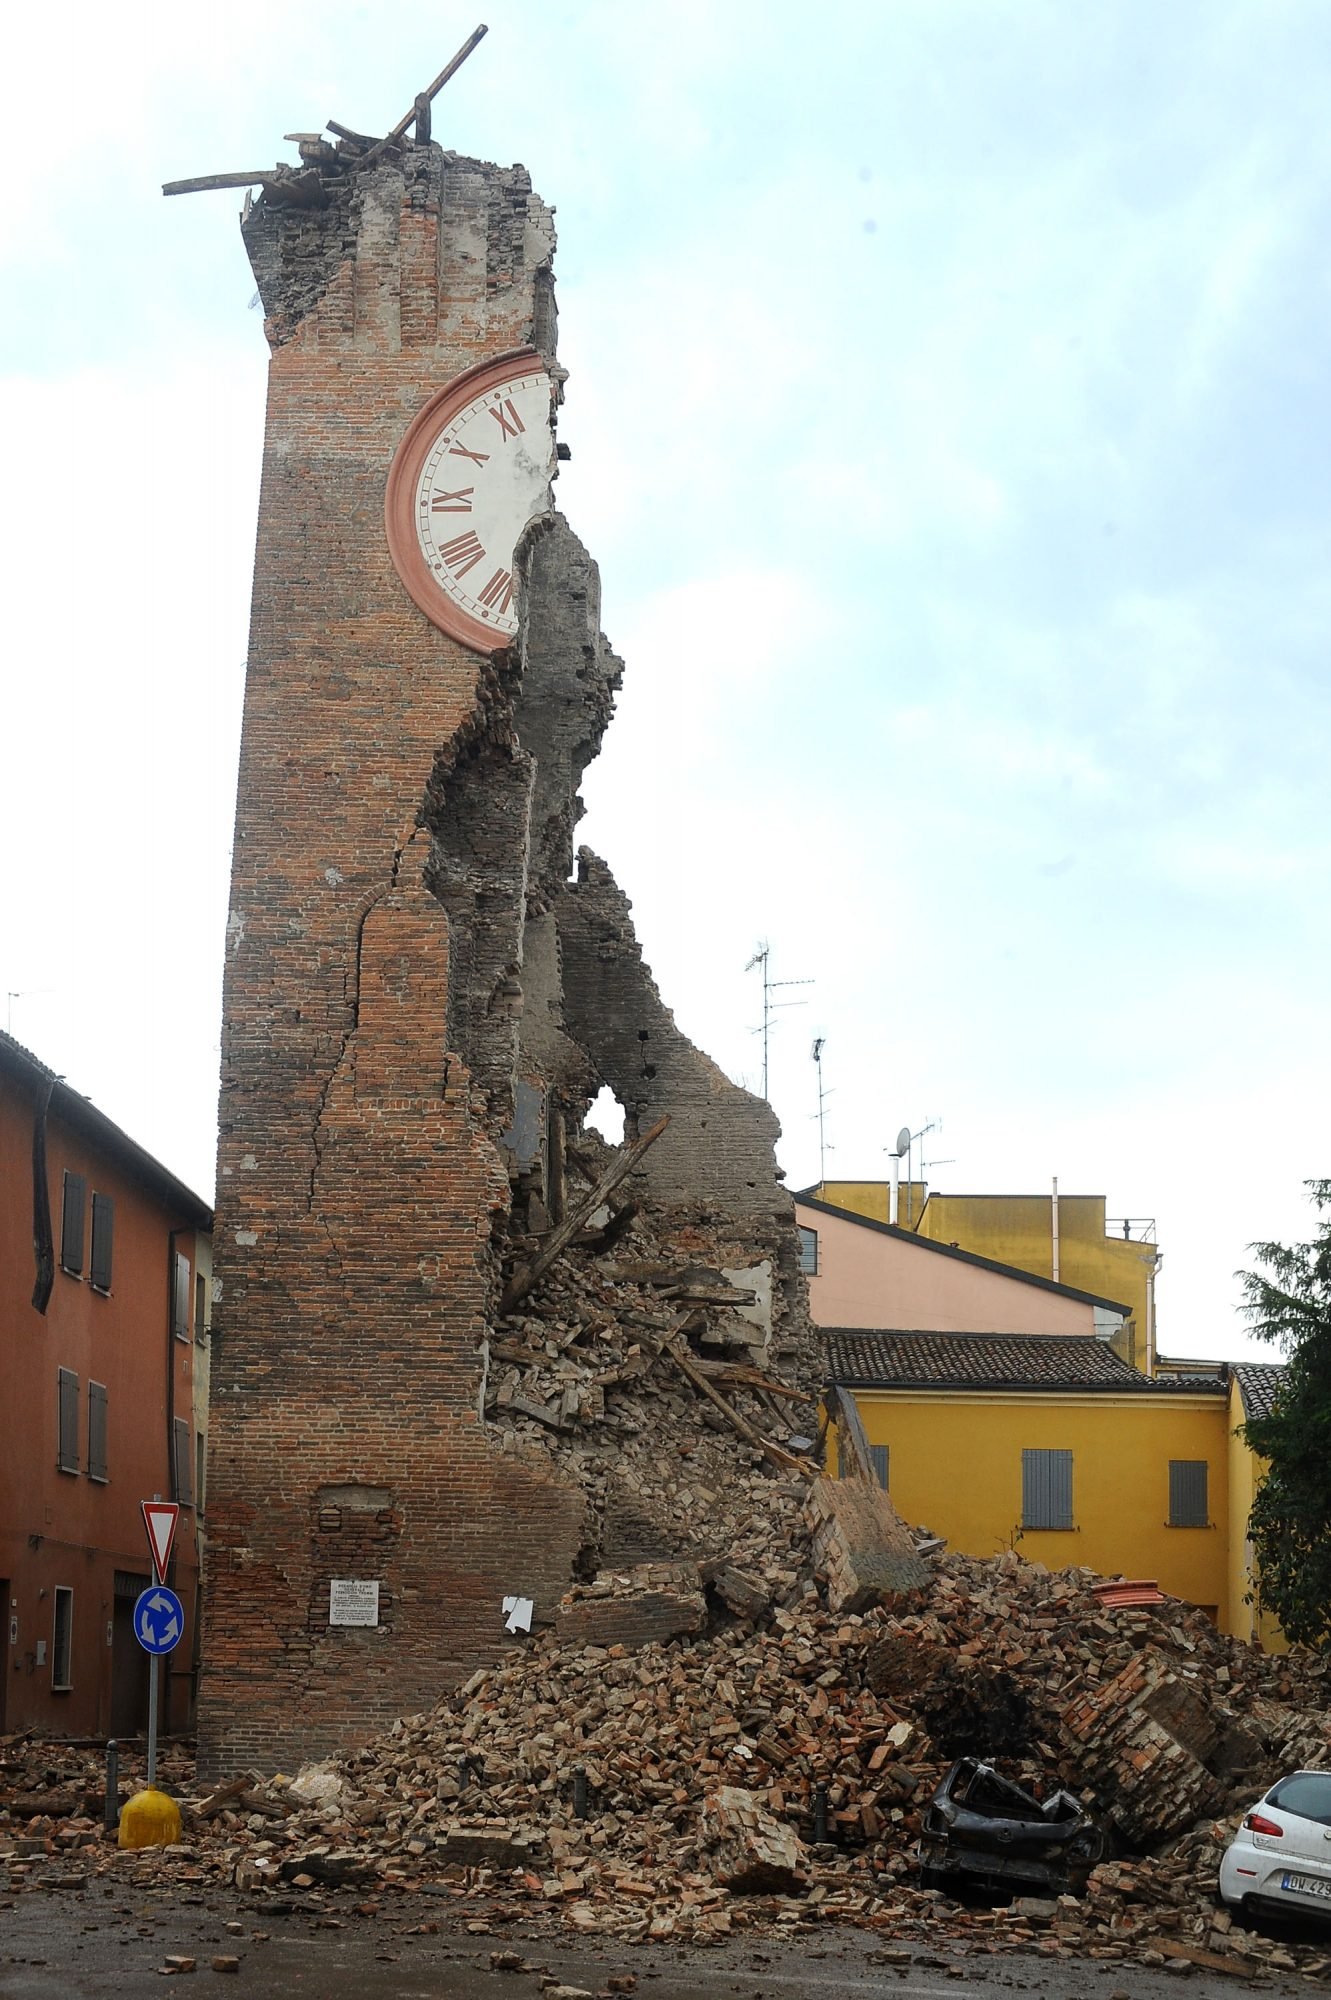 FERRARA, ITALY - MAY 20: Modenesi's Towers of Finale Emilia are destroyed following an earthquake on May 20, 2012 in Ferrara, Italy. At least four people were killed after the magnitude 6.0 quake - which destroyed many historic buildings - struck in the early hours. (Photo by Roberto Serra/Iguana Press/Getty Images)